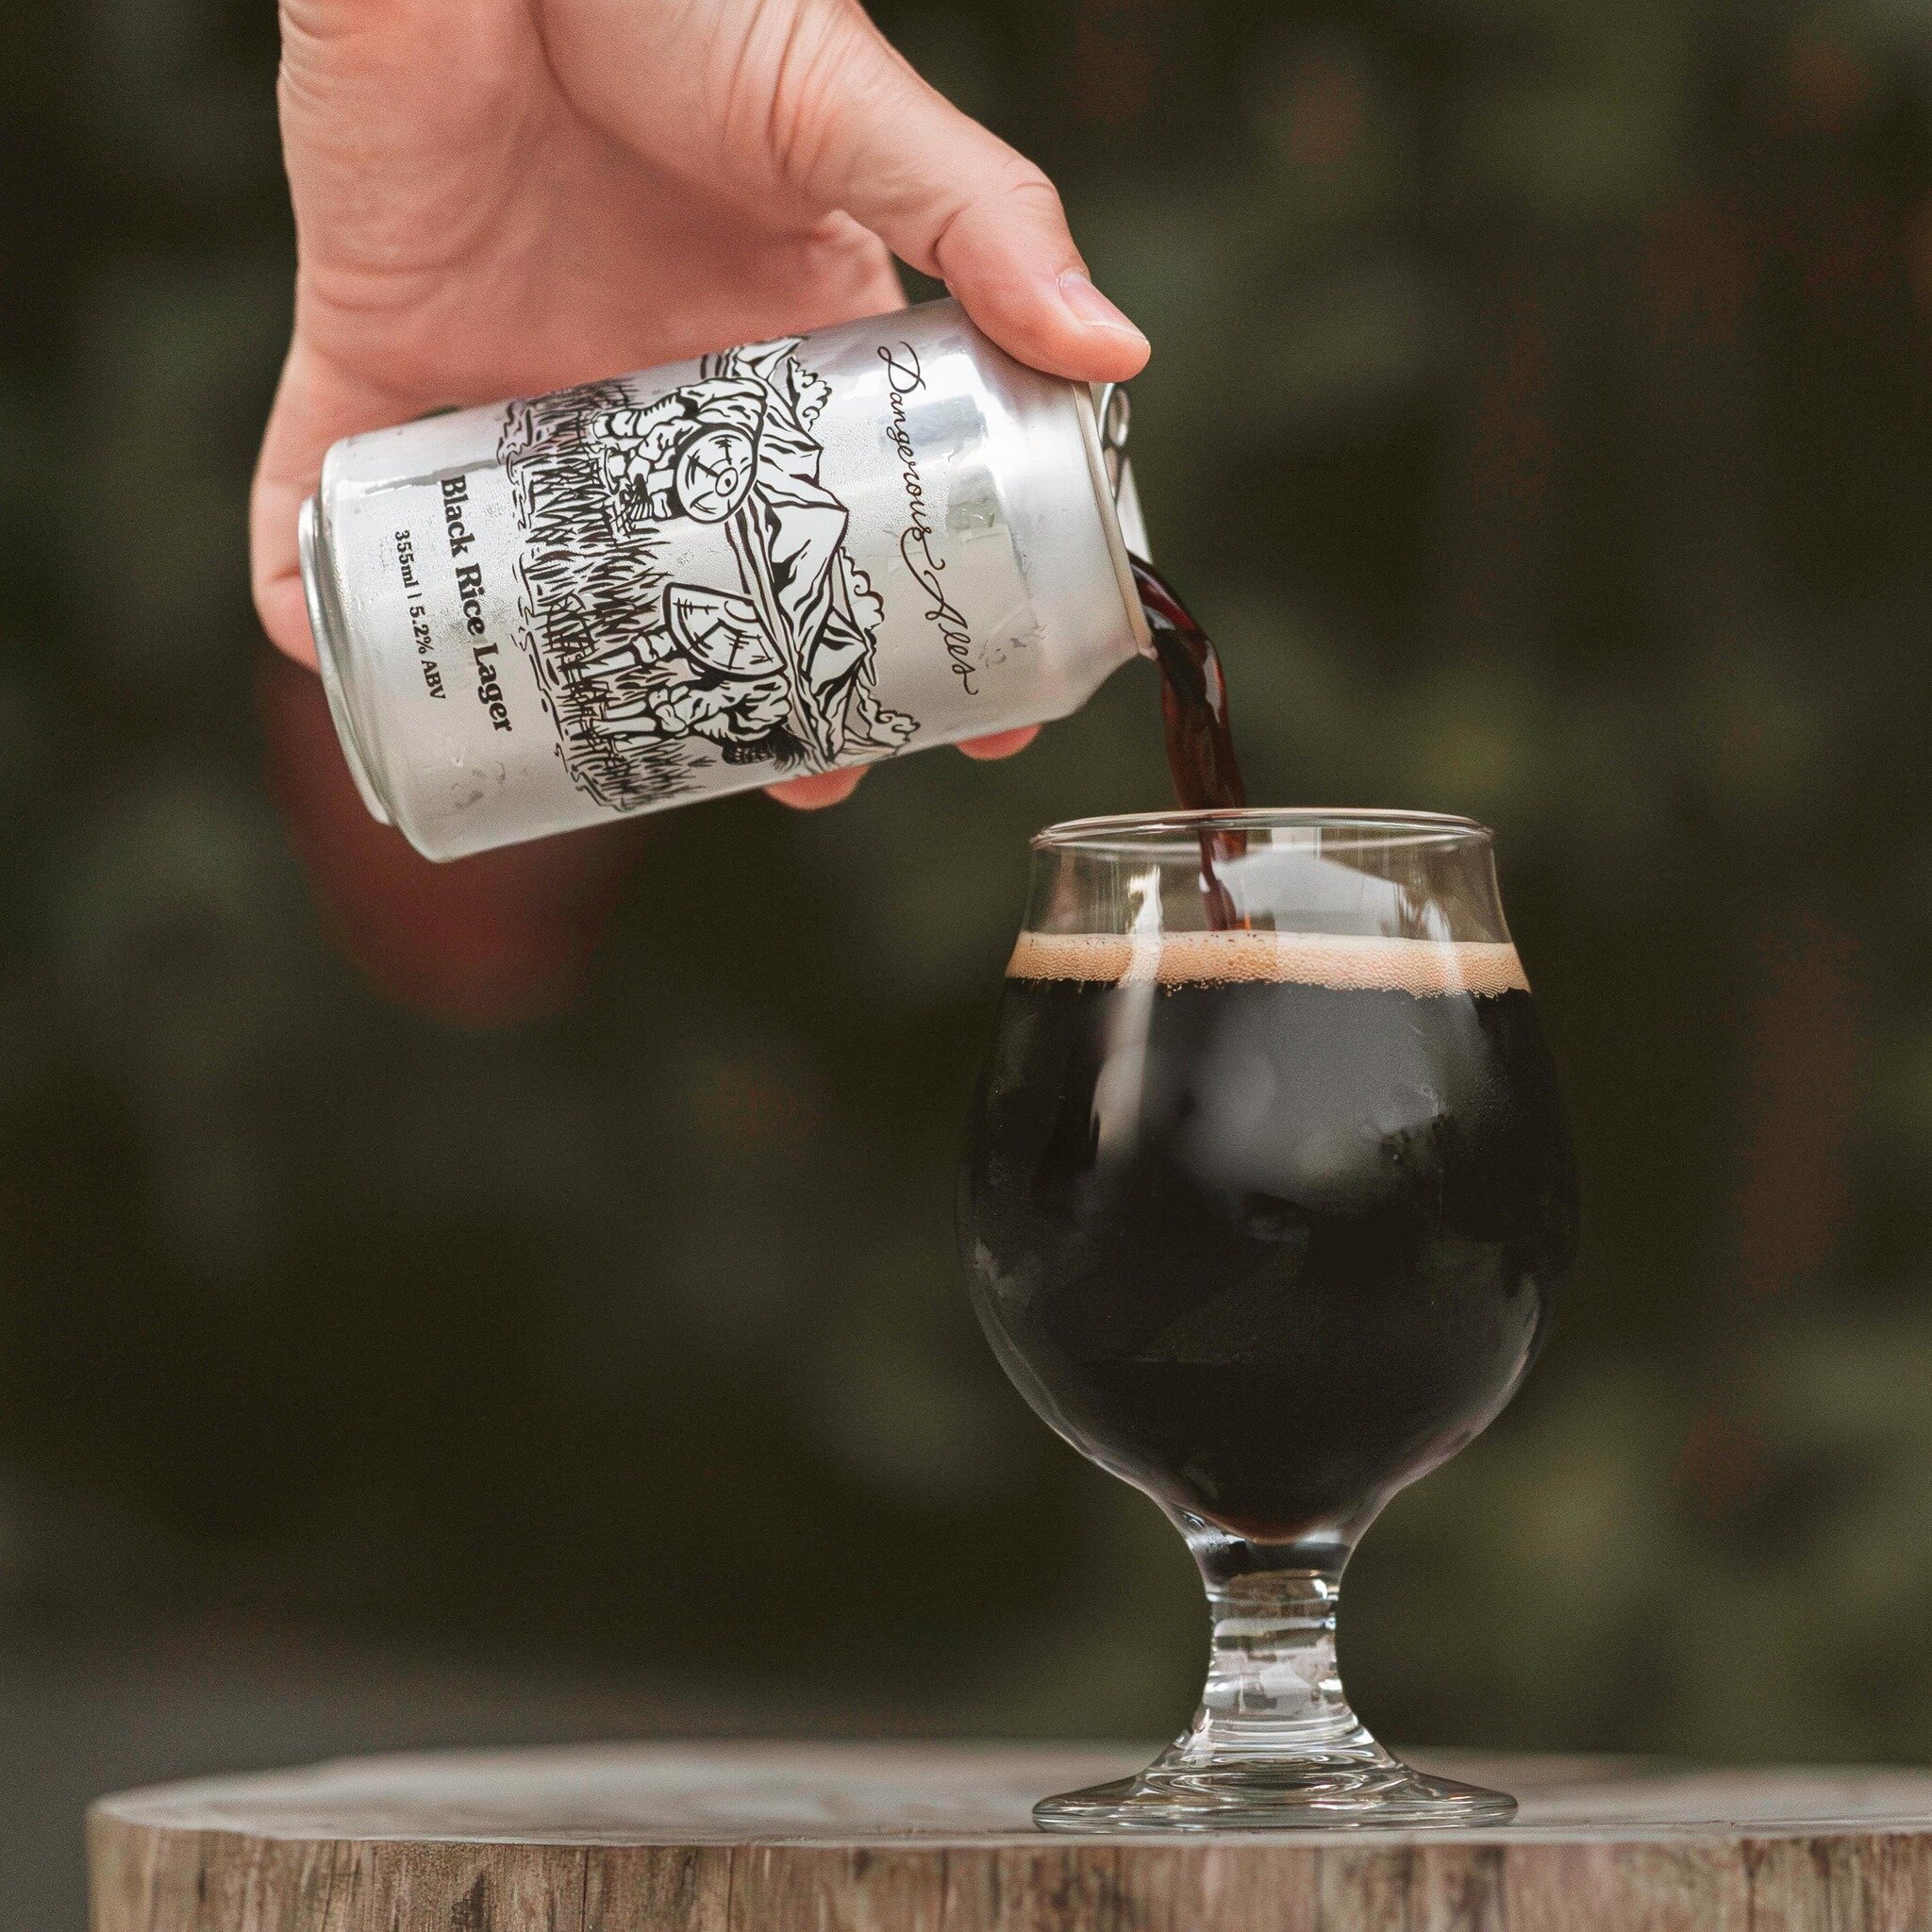 NEW BEER! Black Rice Lager - 5.2%
This Black Rice Lager tantalizes your taste buds with aromas of roast caramel, chocolate, and vanilla, leading into a toasty smoothness with rich caramel notes, balanced bitterness, and a clean, dry finish that leave